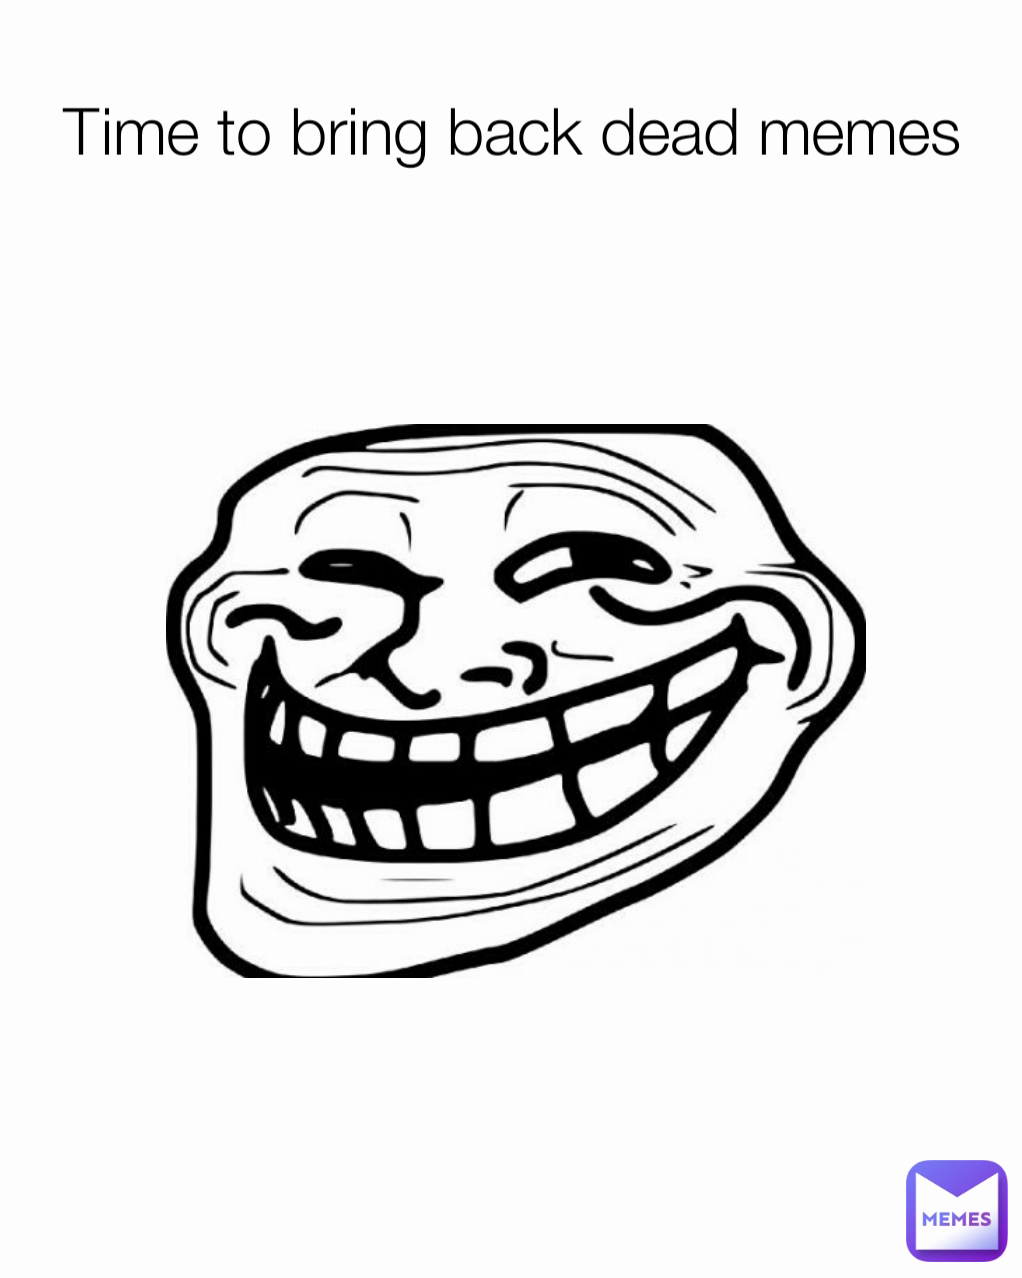 Time to bring back dead memes